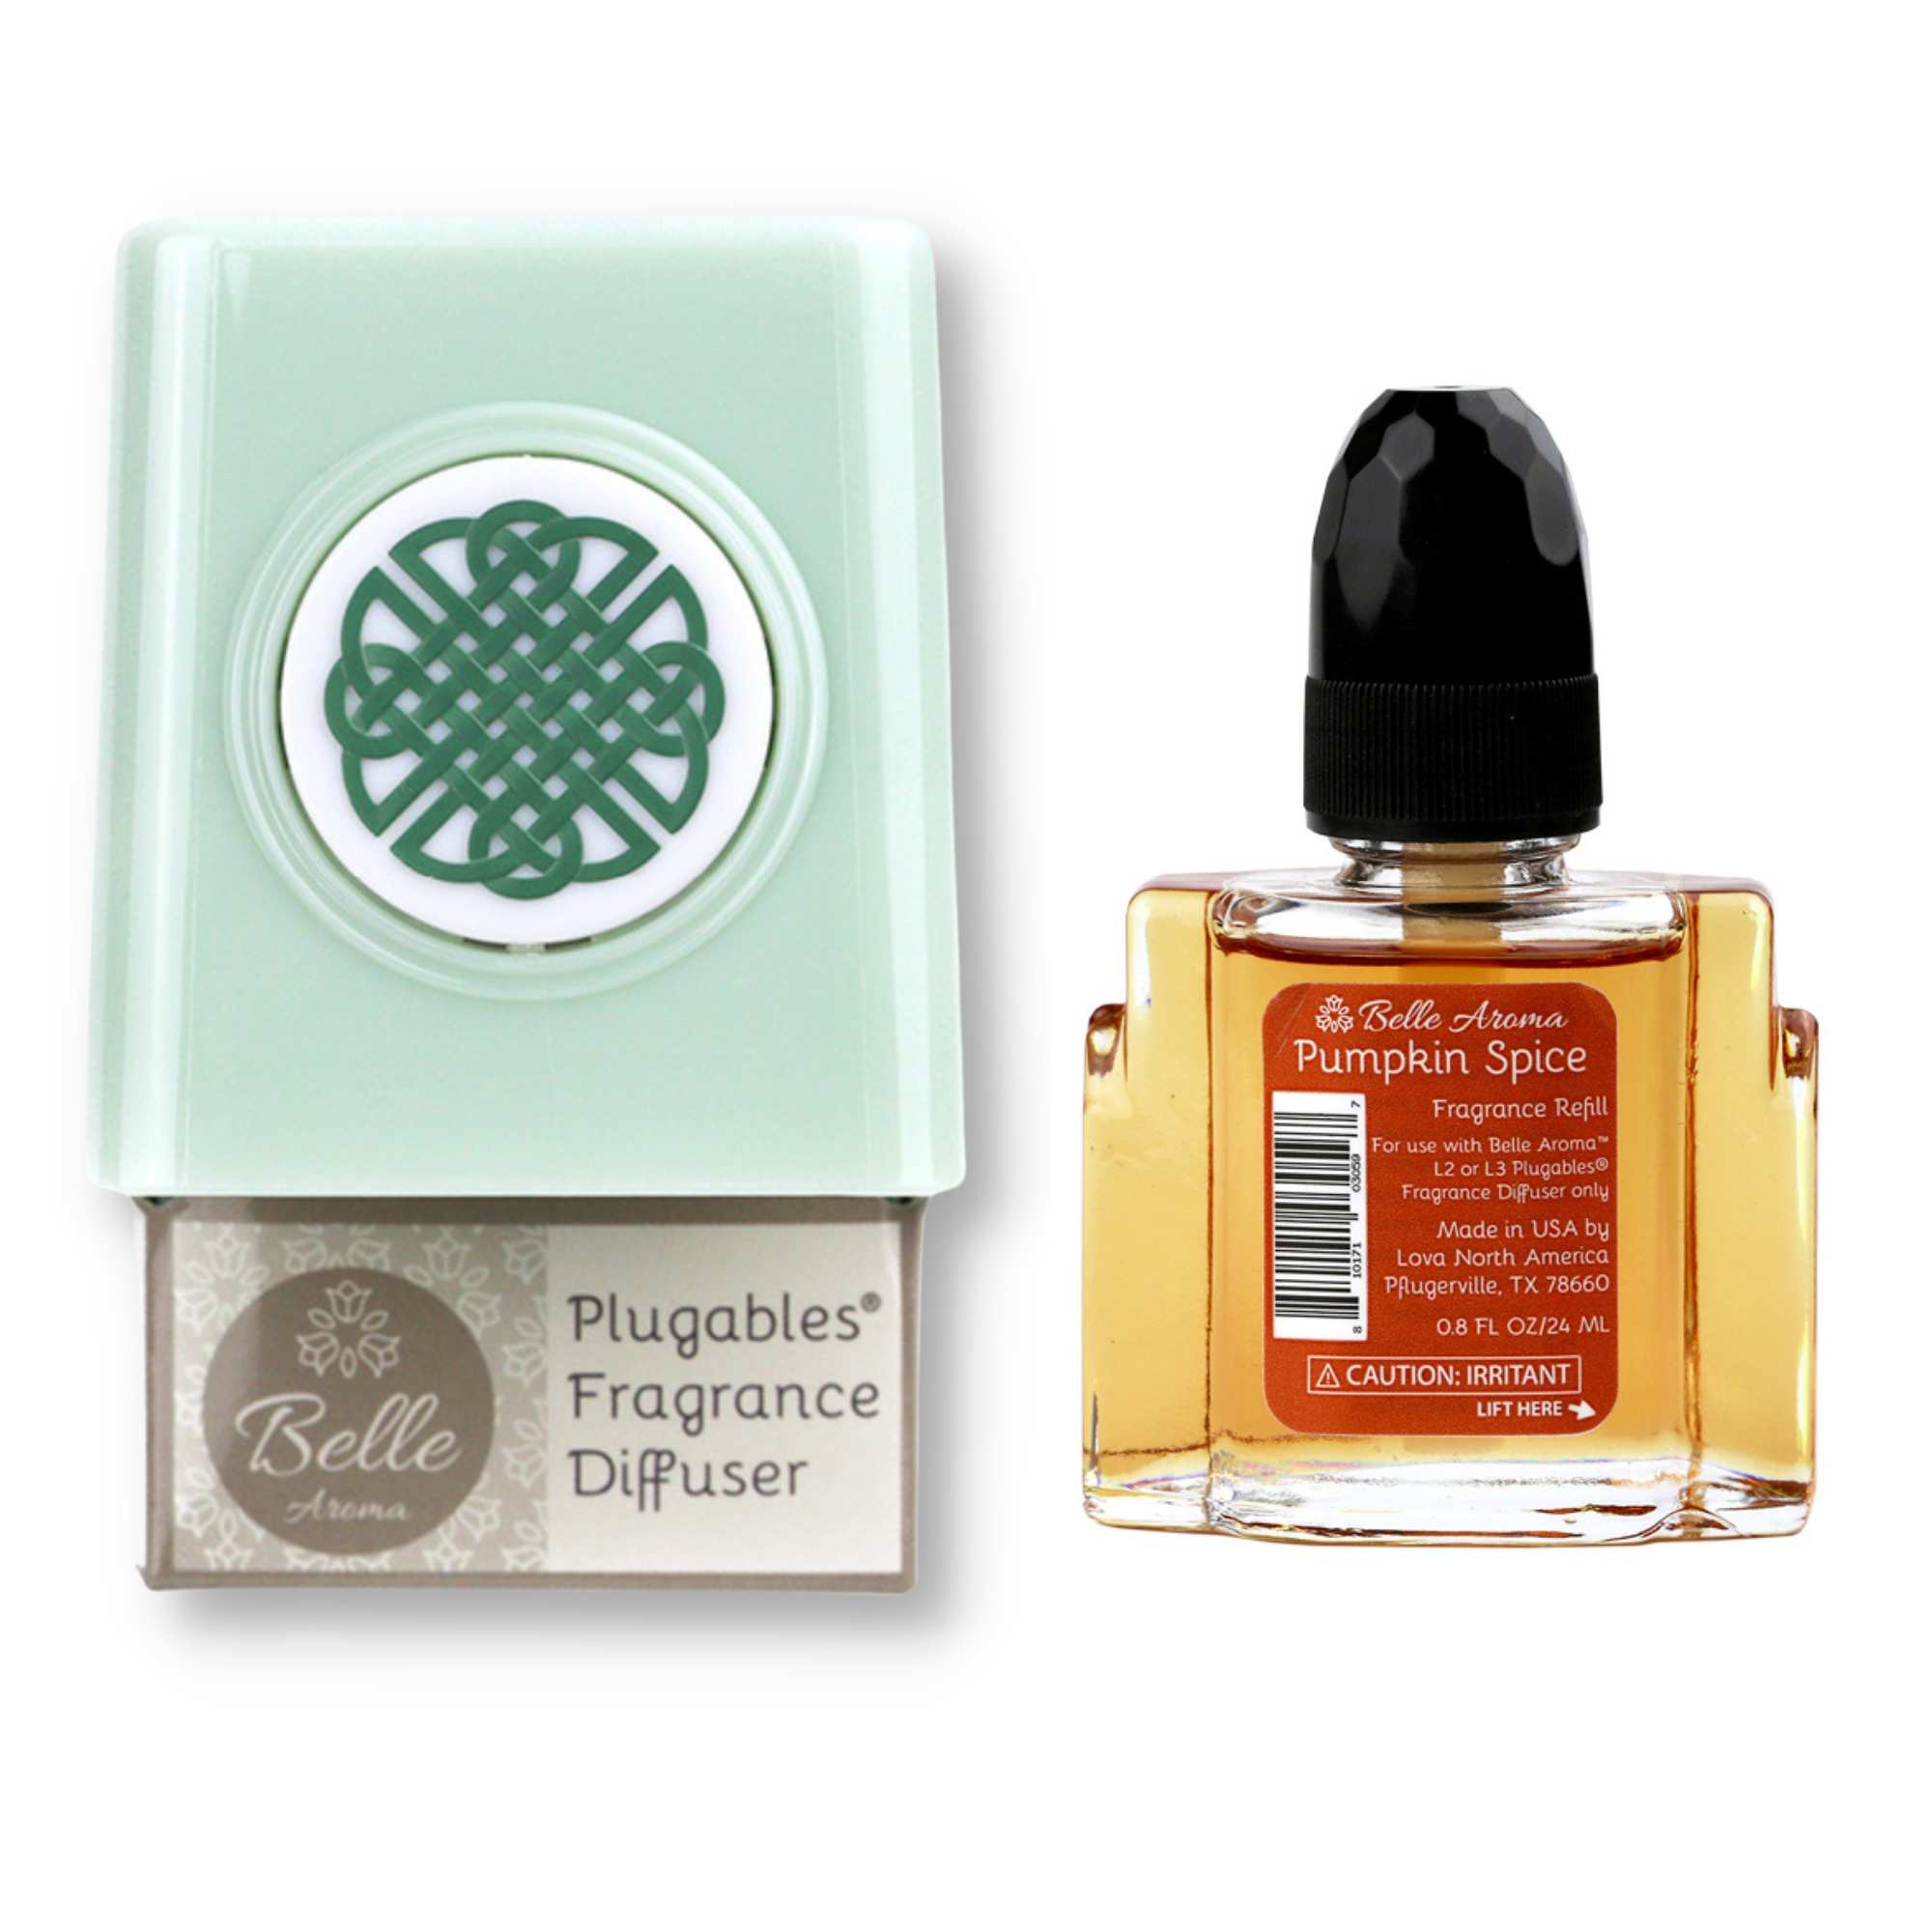 Celtic Knot Medallion Plugables® Plugin Aromalectric® Scented Oil Diffuser - Sea Glass with Pumpkin Spice Fragrance Oil Home Fragrance Accessories